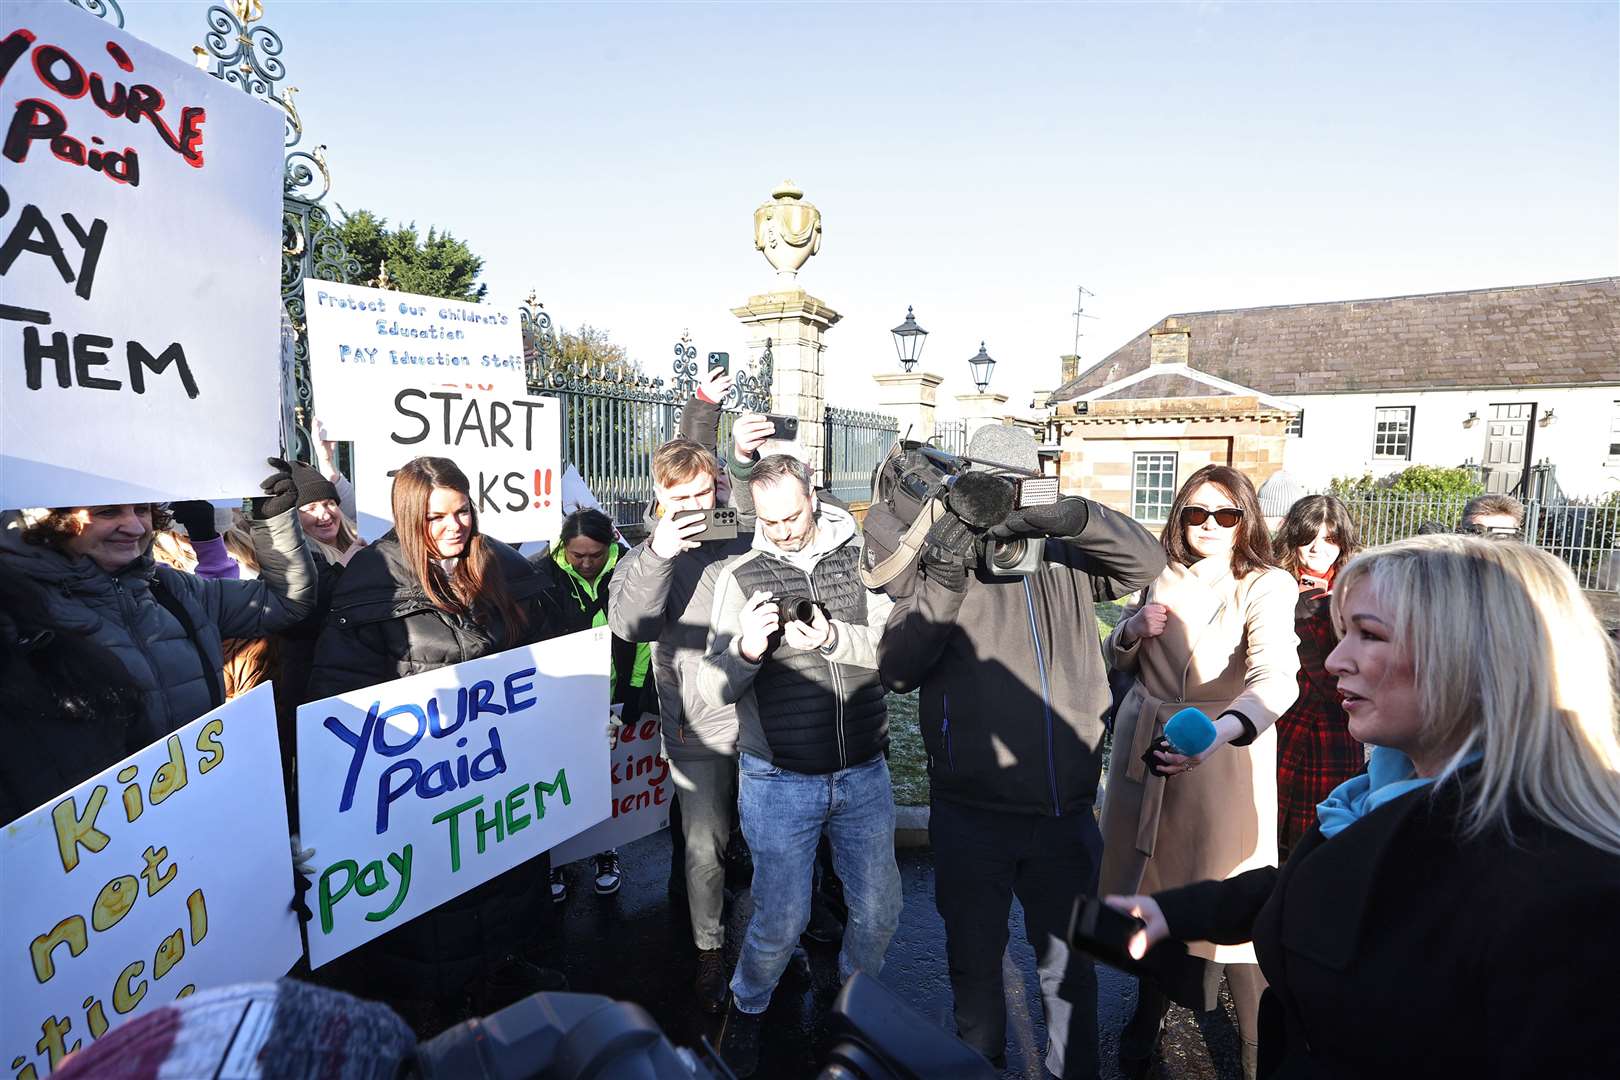 Sinn Fein vice-president Michelle O’Neill (right) speaks to protesters from the Colin Autism Support and Advice Group as they protest outside Hillsborough Castle (Liam McBurney/PA)